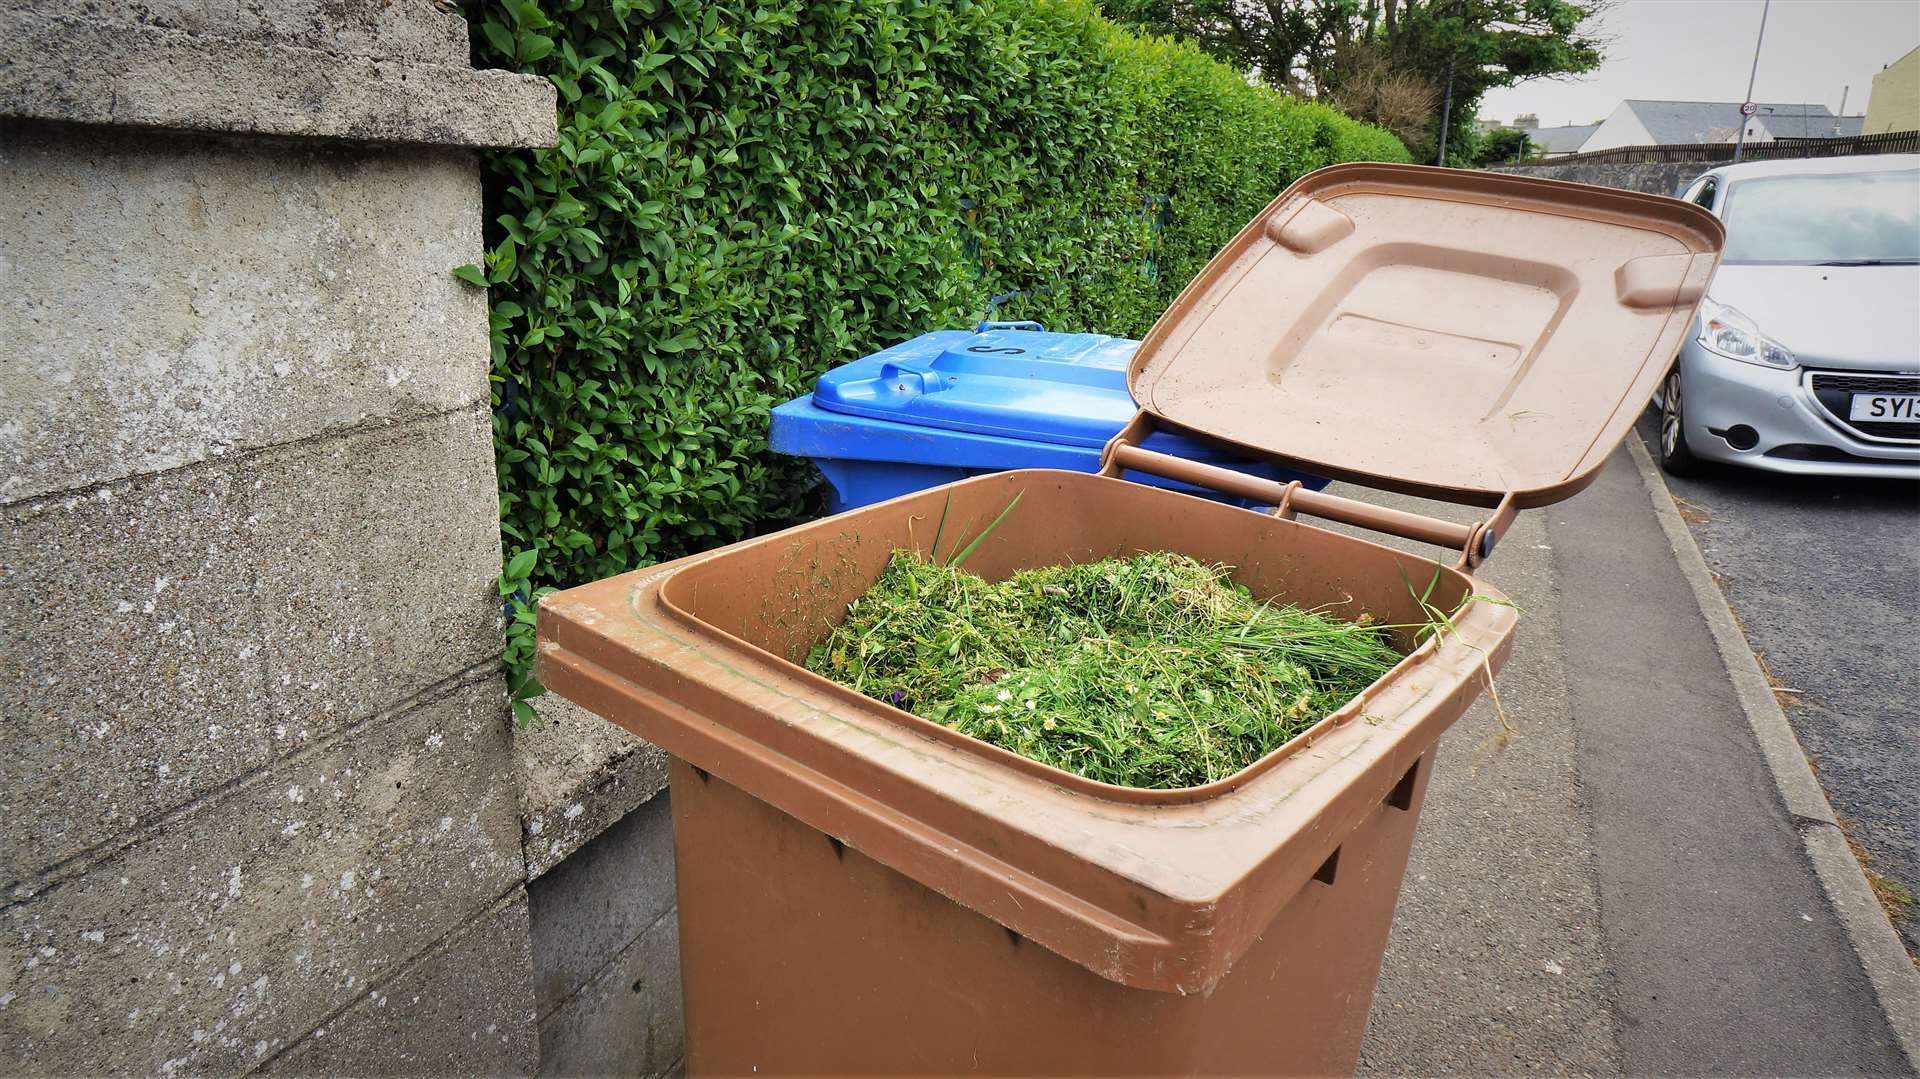 Highland Council says the brown bin system helps divert unnecessary garden waste to landfill. Picture: DGS